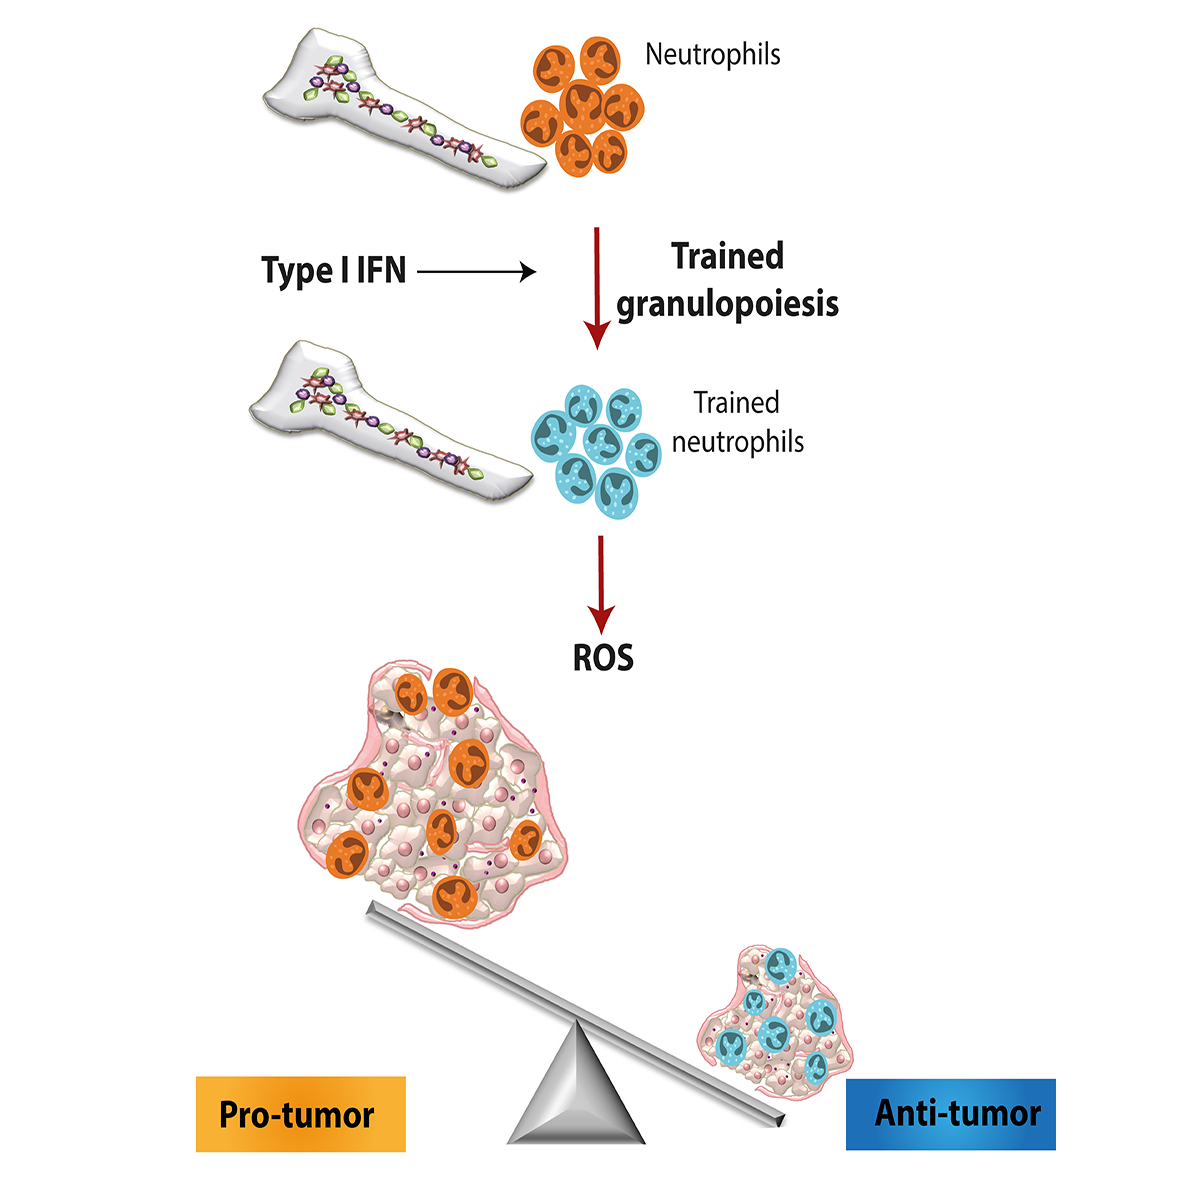 scientific diagram shows how immune training of neutrophils in the bone marrow can produce ROS, or reactive oxygen species, to produce an anti-cancer response by the immune system